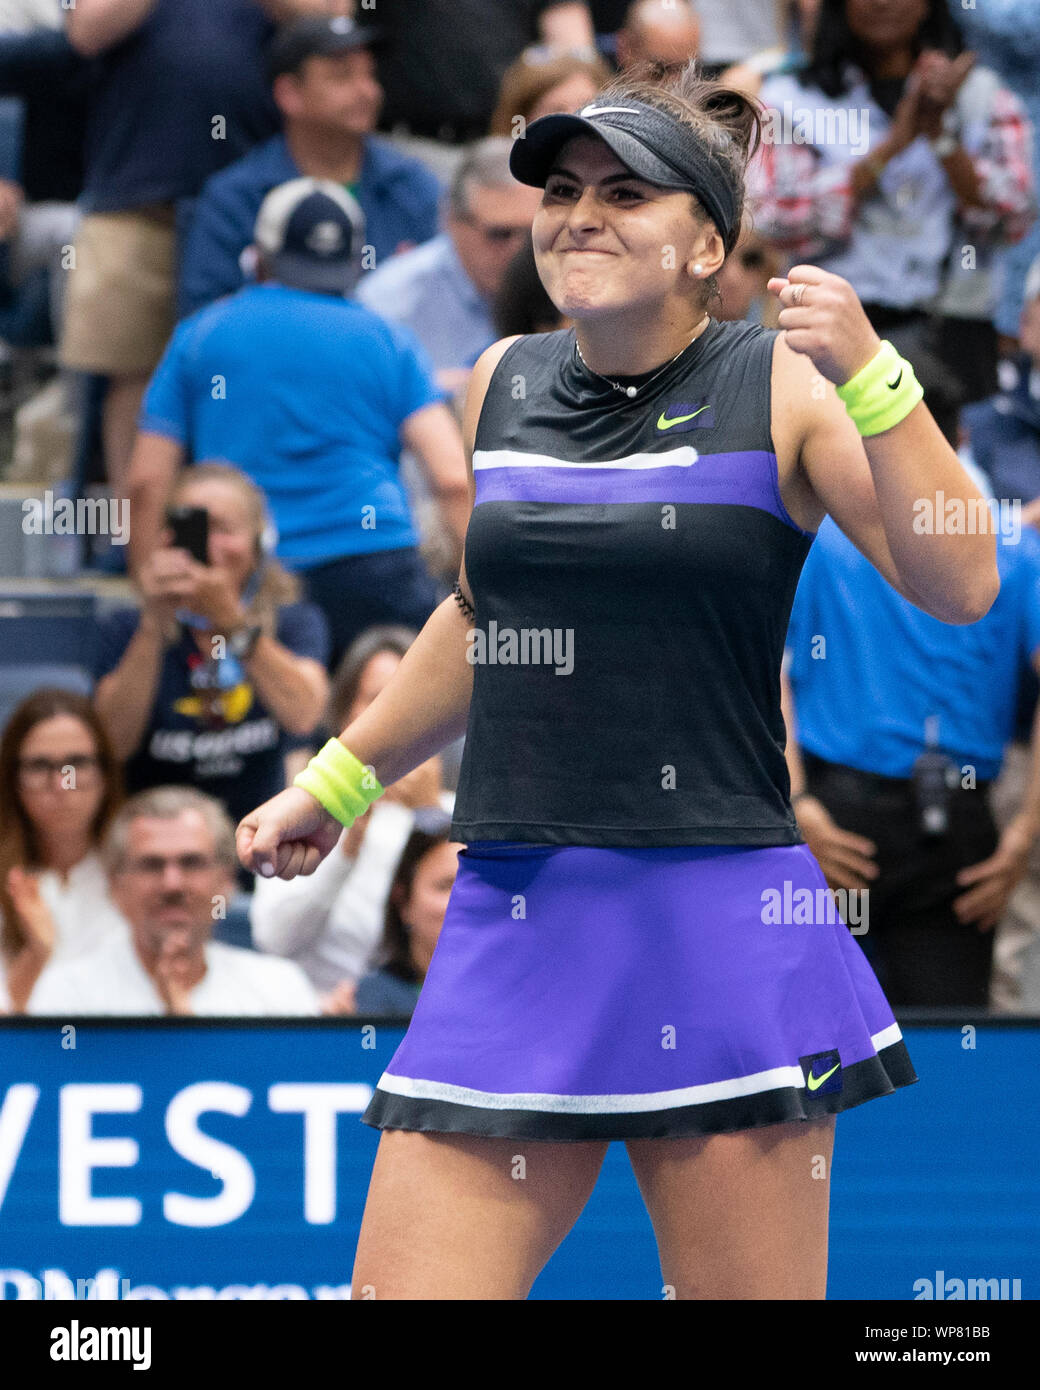 Flushing, Queens, NY, USA. 7th Sep, 2019. Bianca Andreescu (CAN) celebrates her victory over Serena Williams (USA) 6-3, 7-5, at the US Open being played at Billie Jean King National Tennis Center in Flushing, Queens, NY. © Jo Becktold/CSM/Alamy Live News Stock Photo